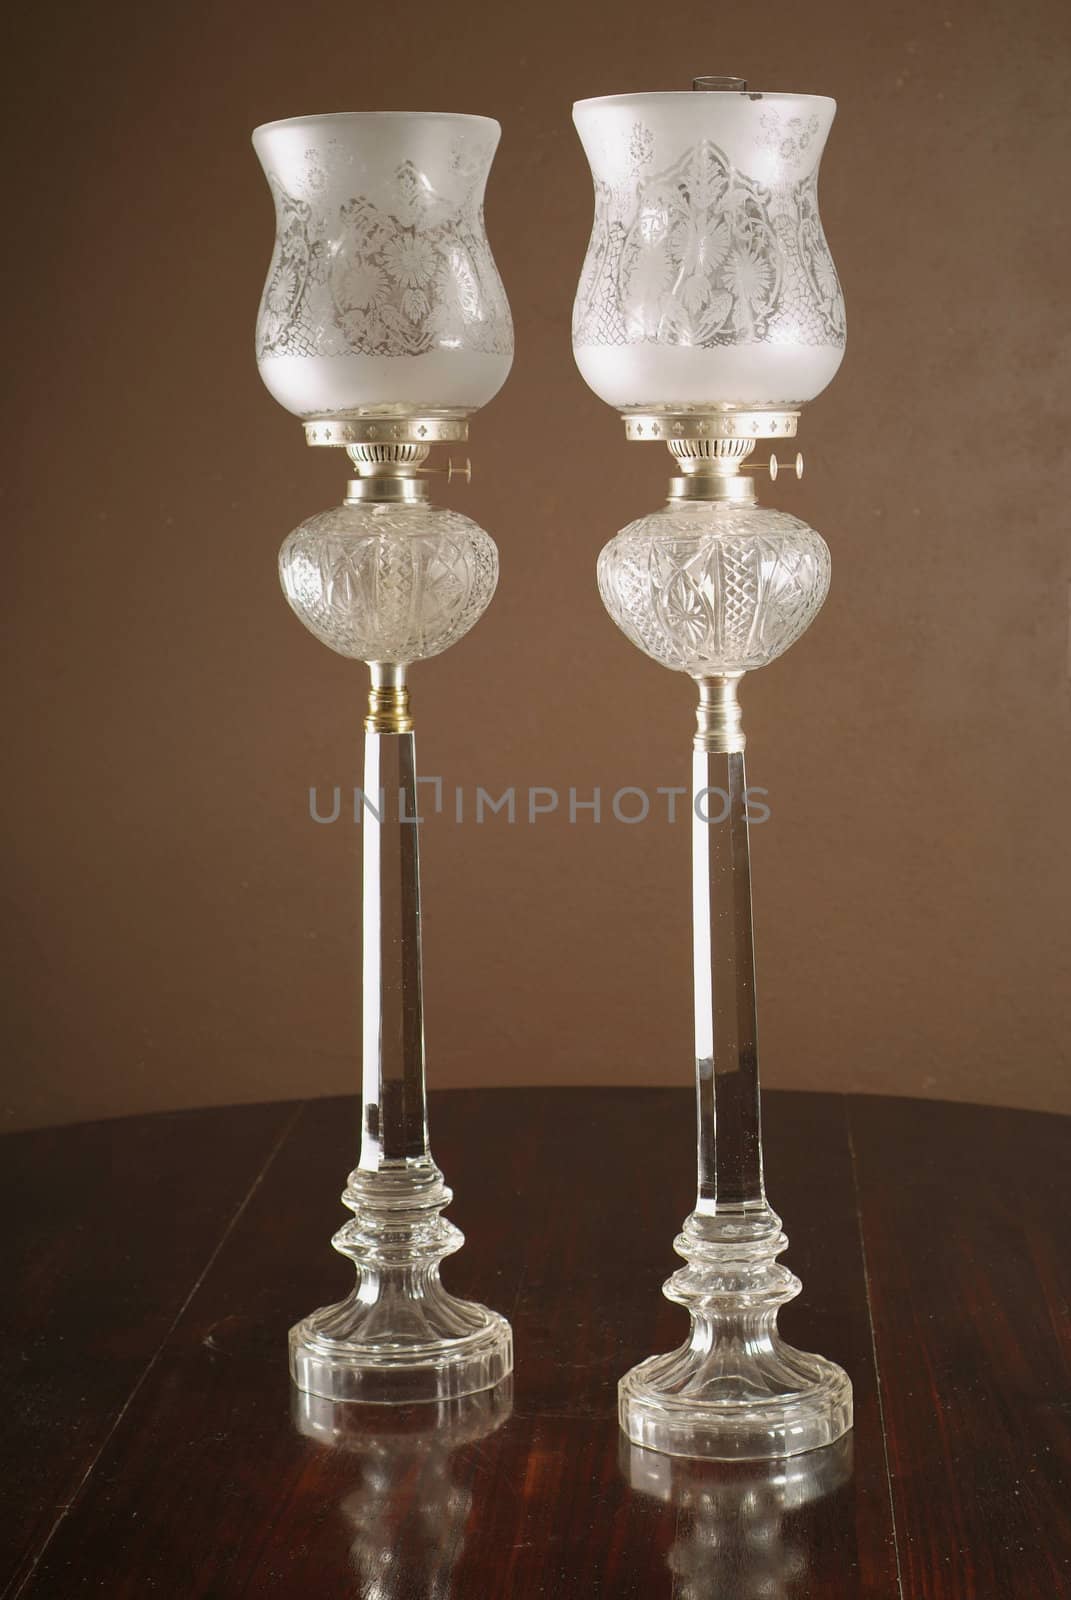 Classic parafin lanterns on table